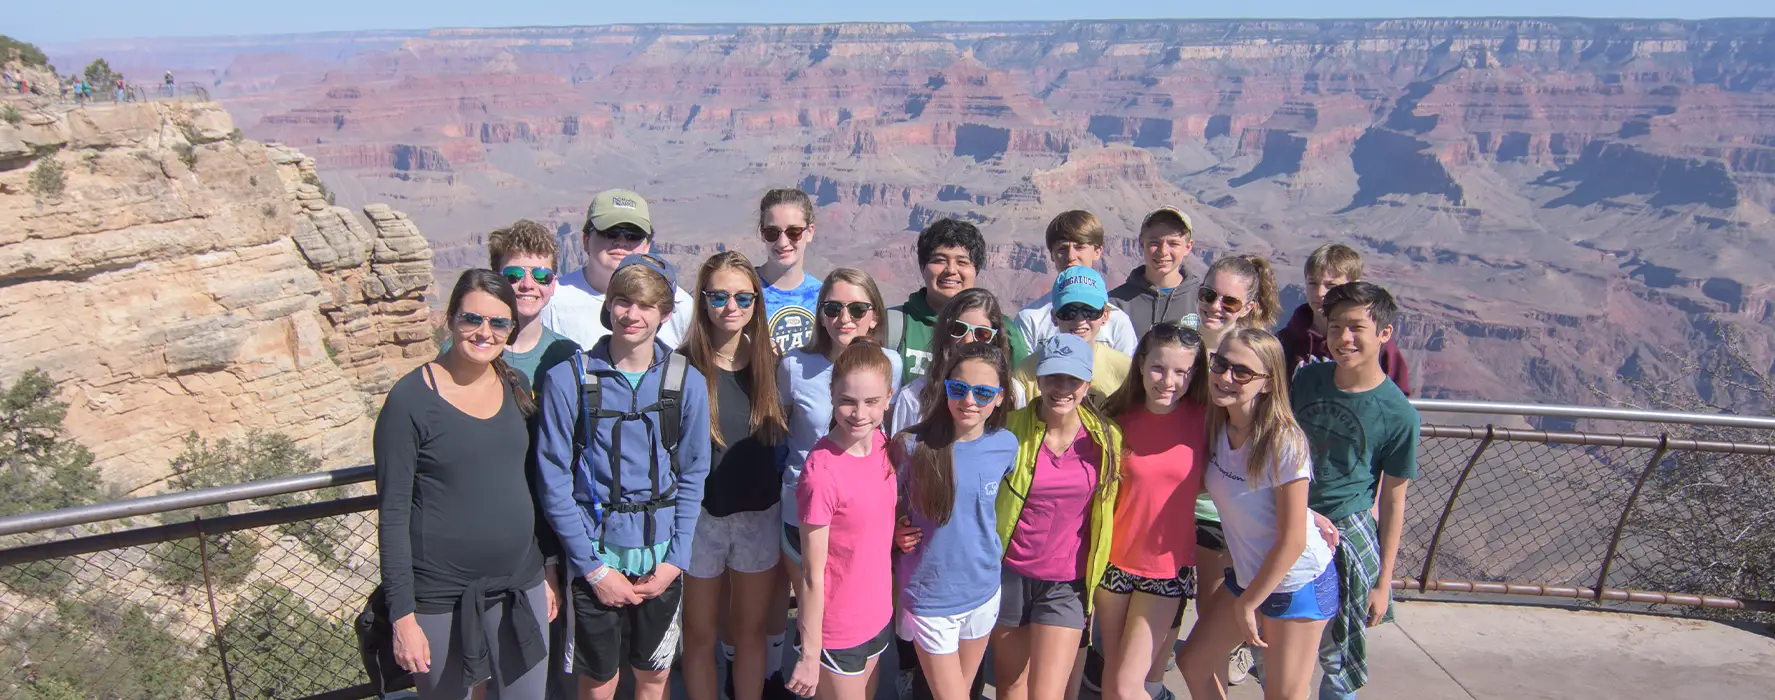 A group of students standing for a photo in front of a fence, with the Grand Canyon in the background.